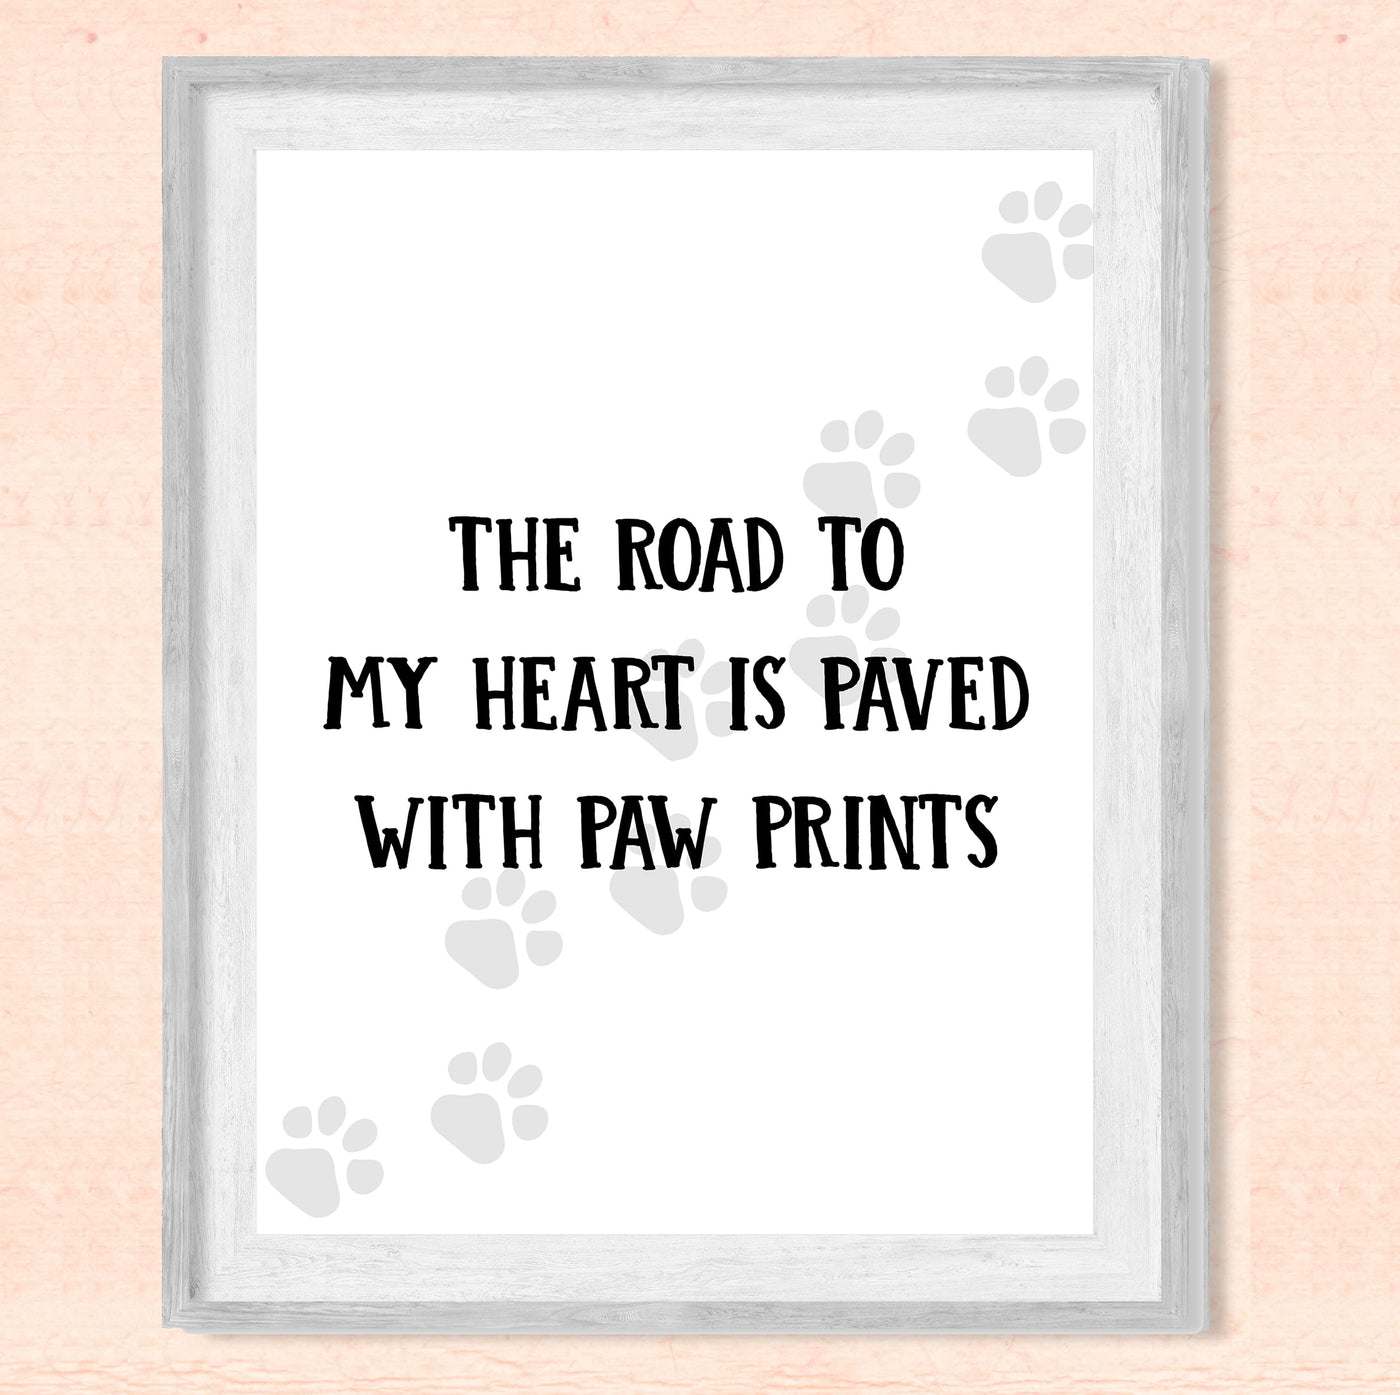 The Road to My Heart Is Paved With Paw Prints- Funny Dog & Cat Wall Art Sign- 8 x 10" Modern Wall Decor Print -Ready to Frame. Perfect Home-Office-Vet Clinic Decor. Great Gift for Pet Owners!